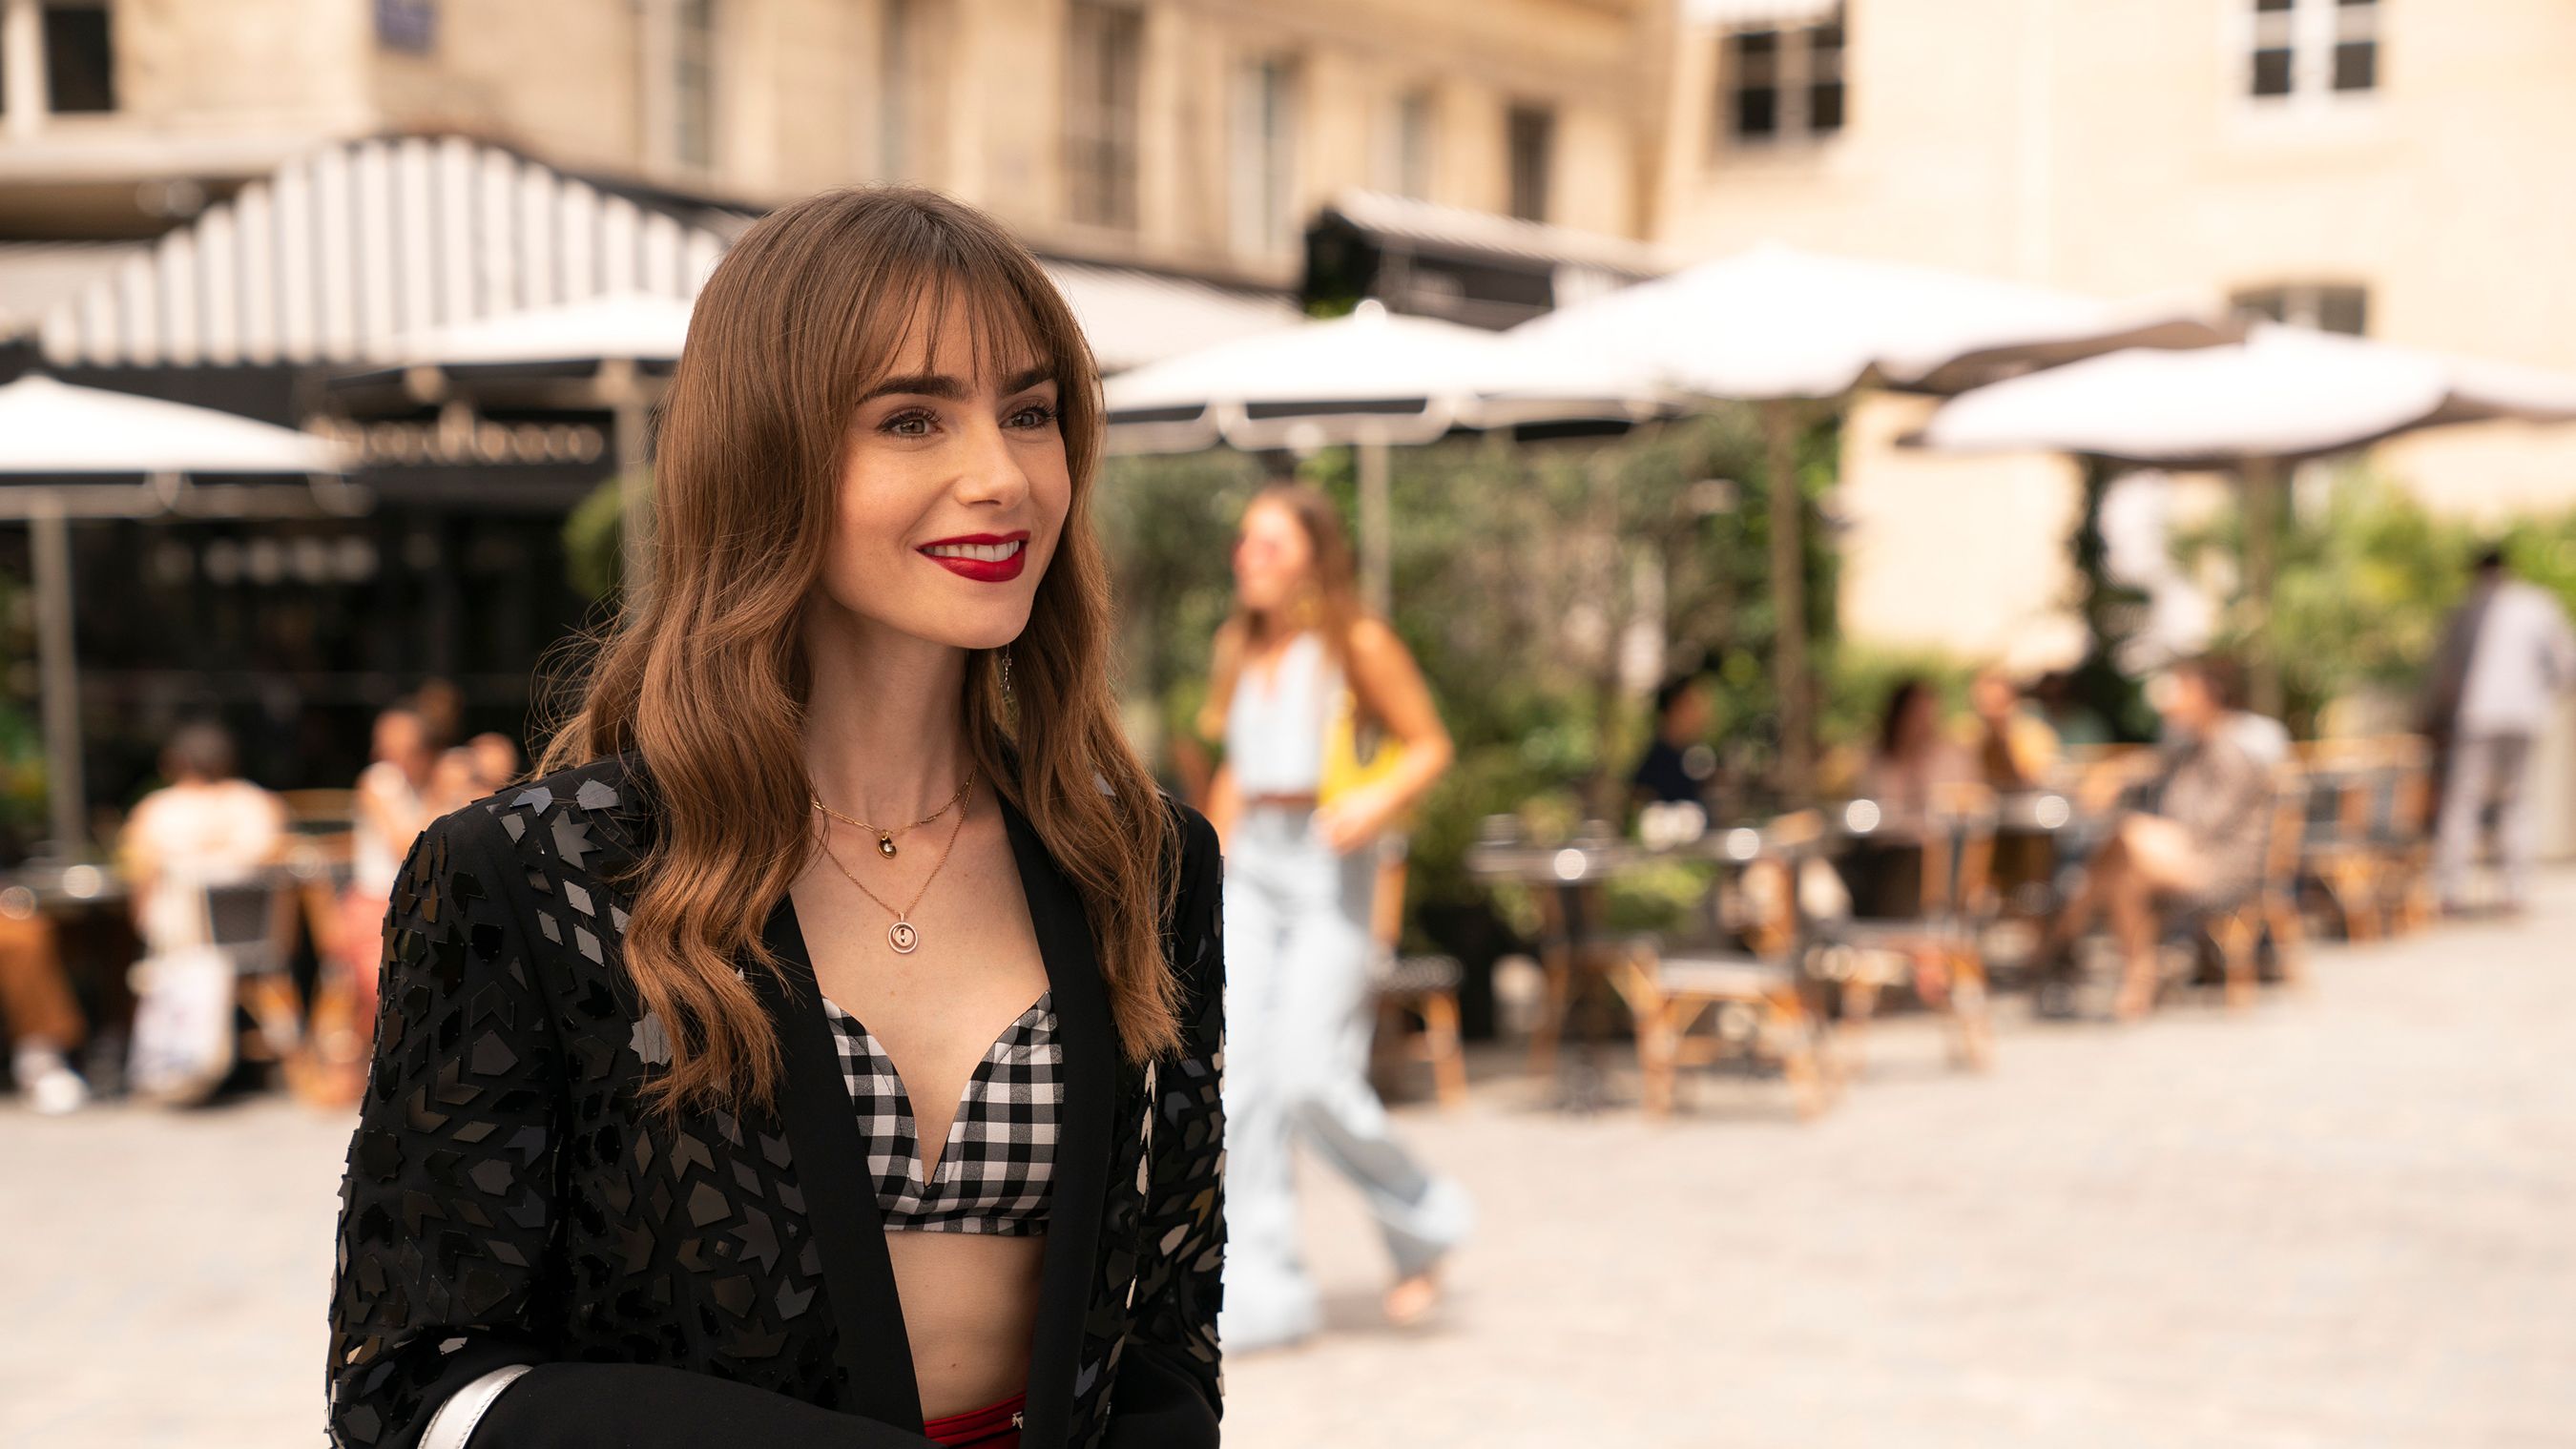 Who Is Melia Kreiling in 'Emily in Paris'? - Facts